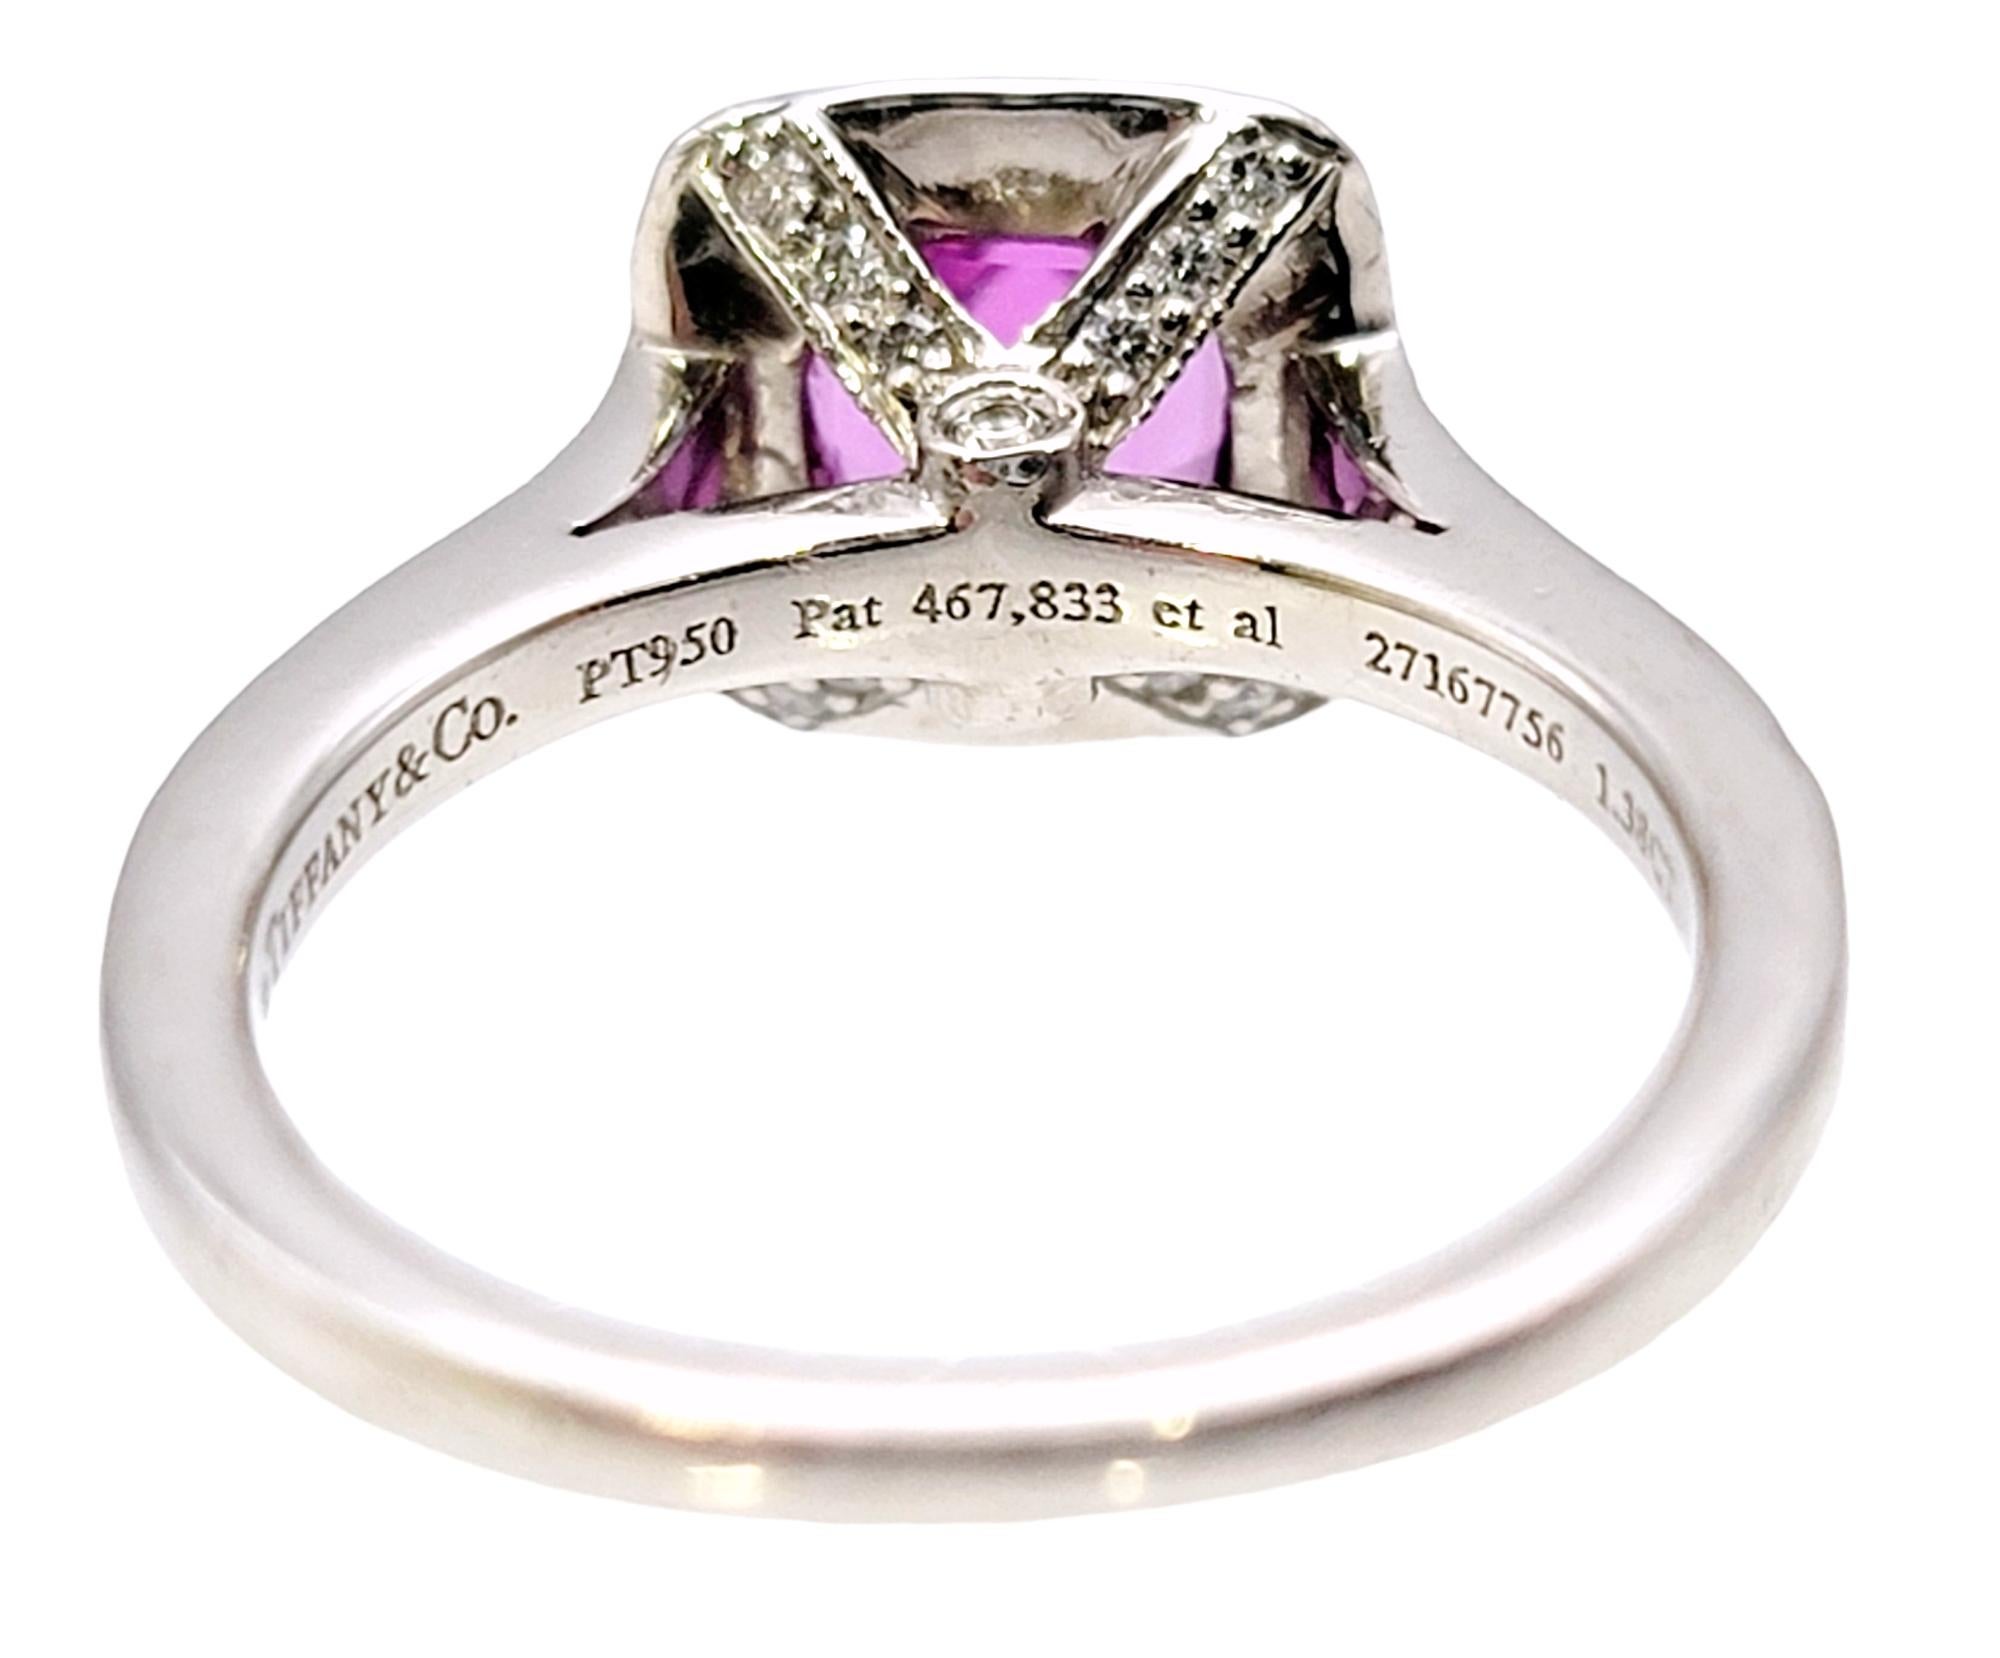 Tiffany & Co. Legacy Pink Sapphire and Diamond Halo Ring in Platinum In Good Condition For Sale In Scottsdale, AZ